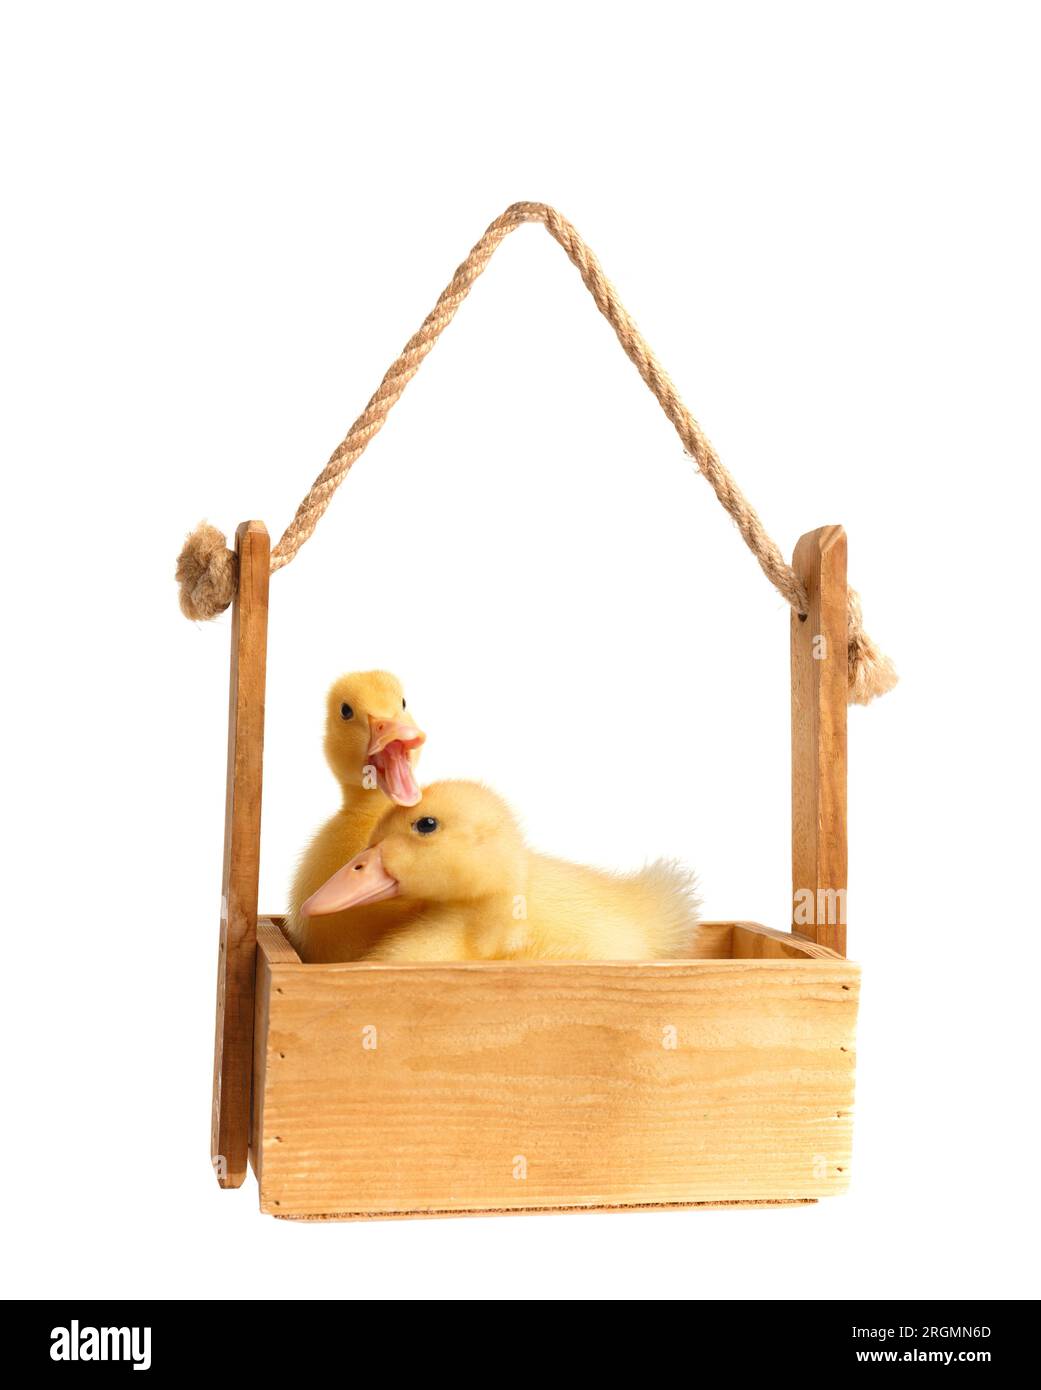 Cute funny little ducklings are sitting in a wooden box on a white background. Young growth of a poultry. Stock Photo